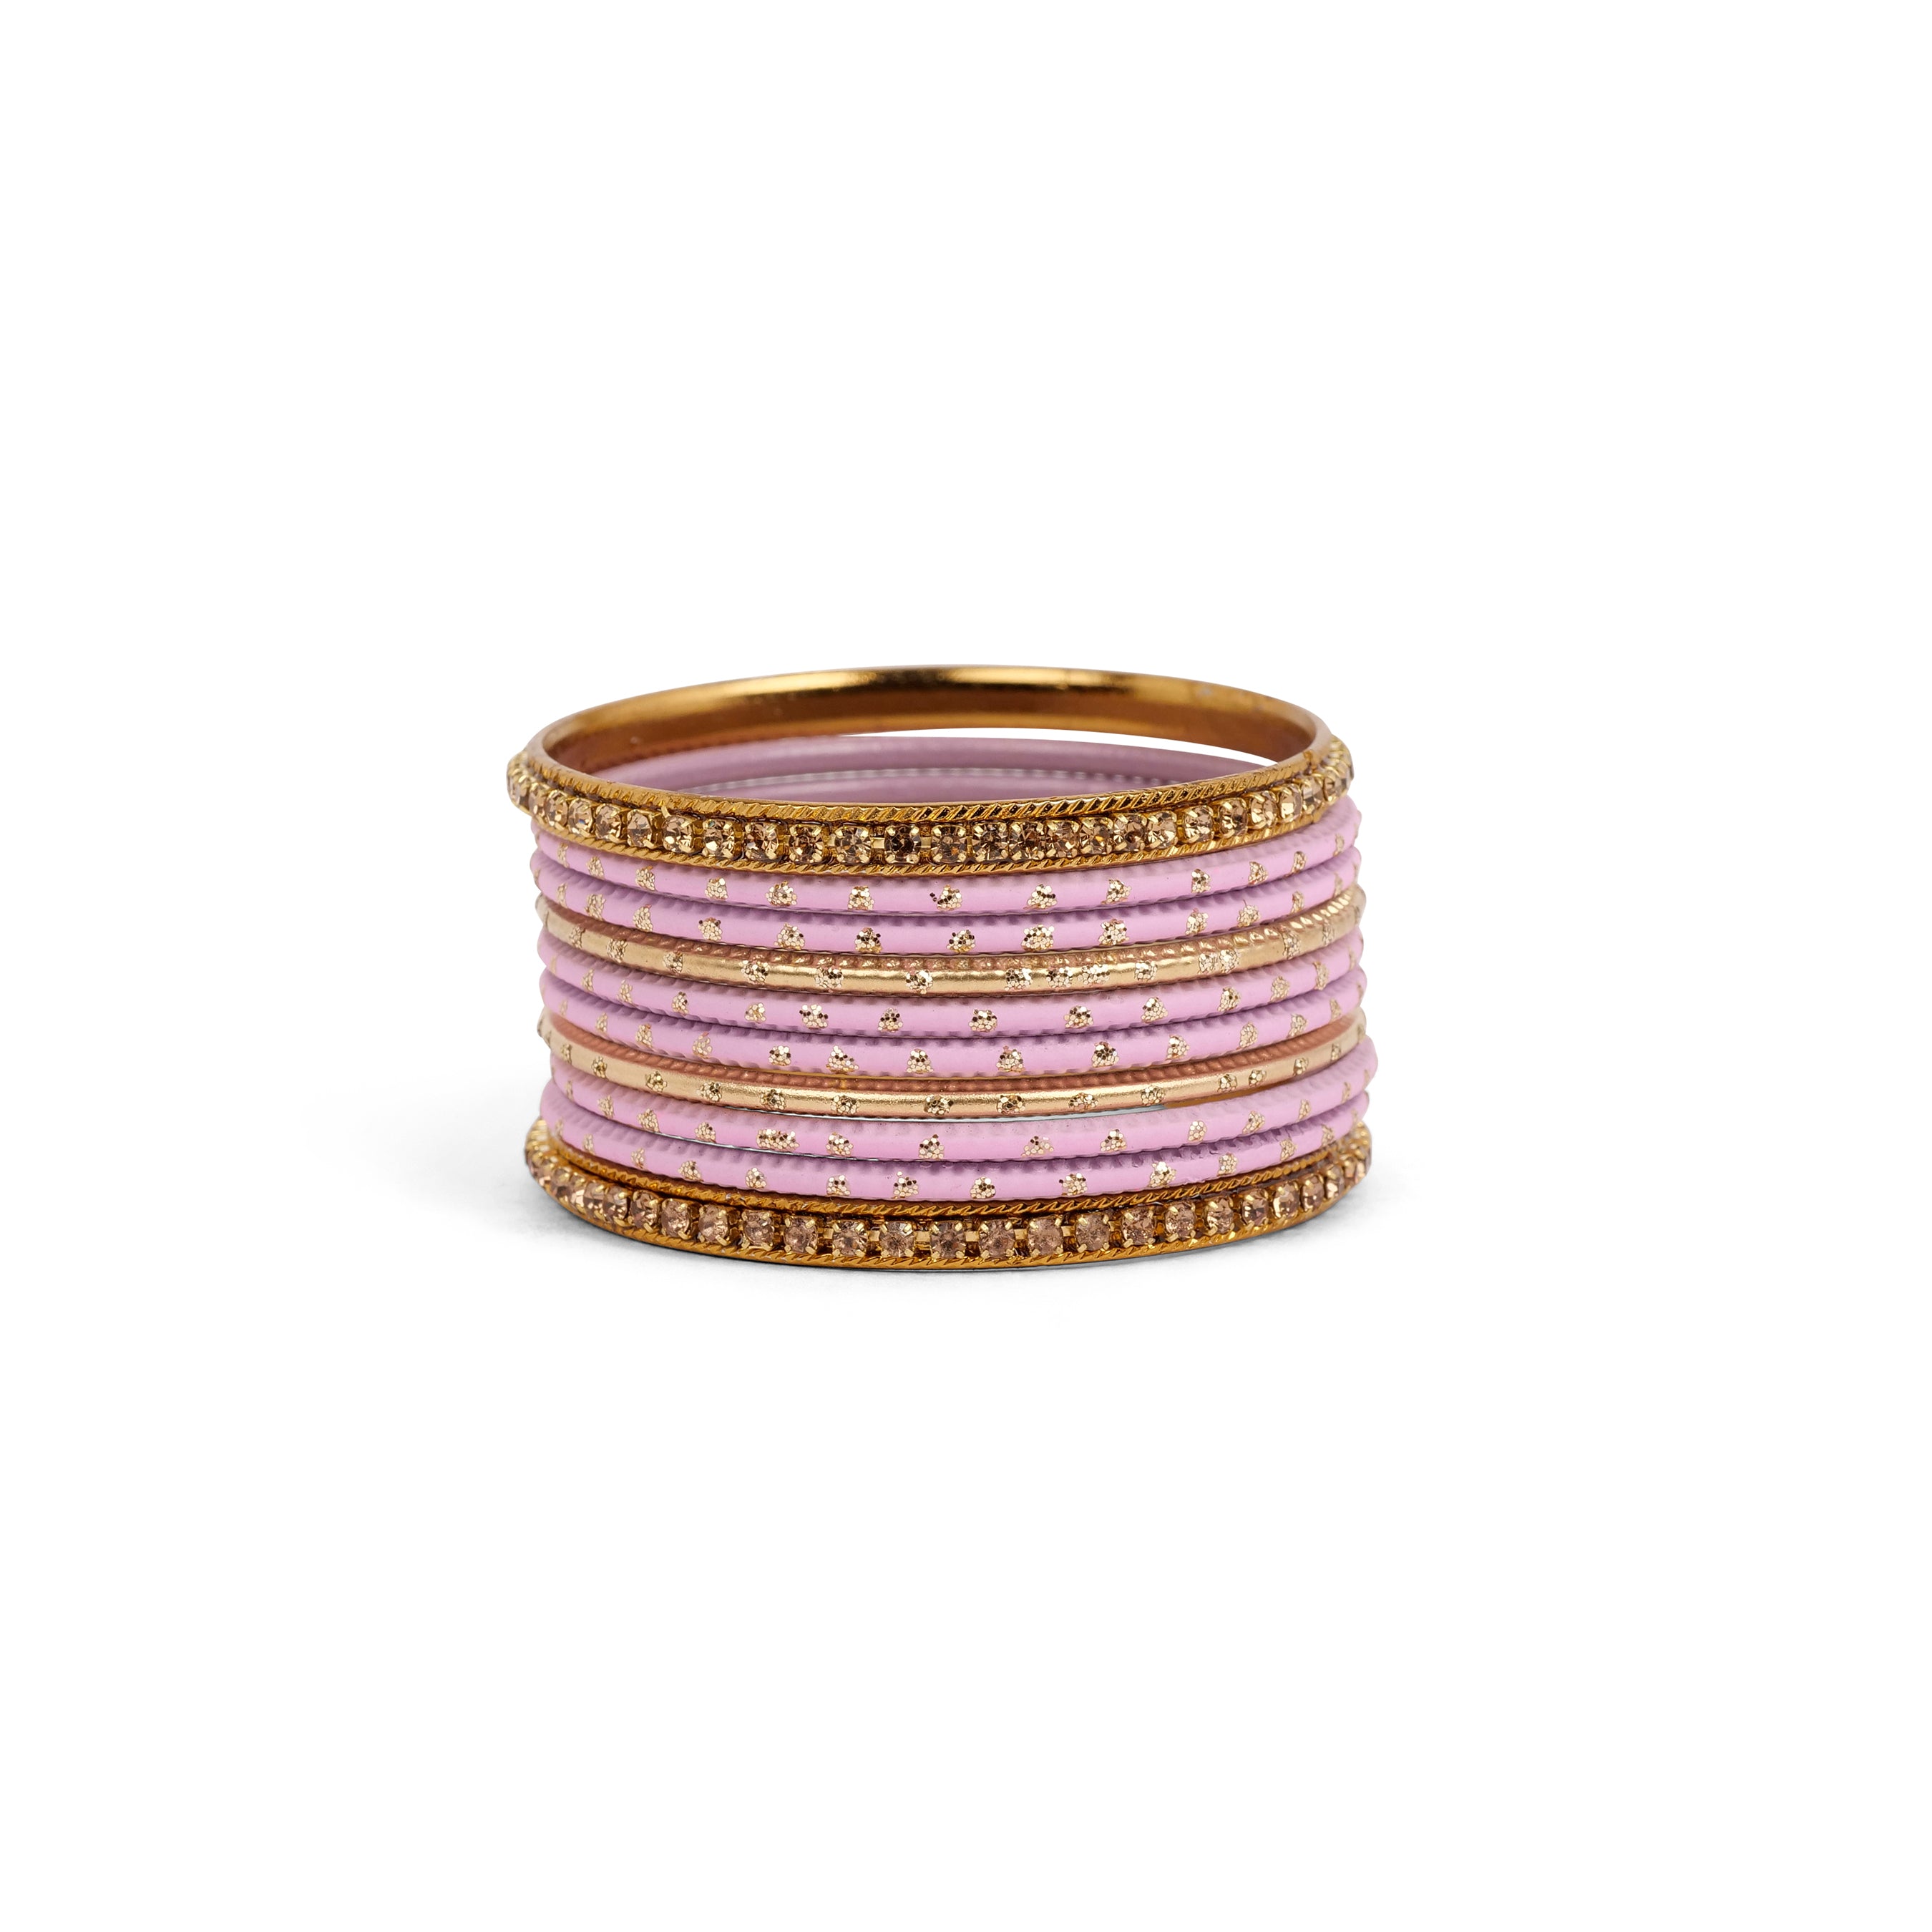 Children's Bangle Set in Light Pink and Antique Gold